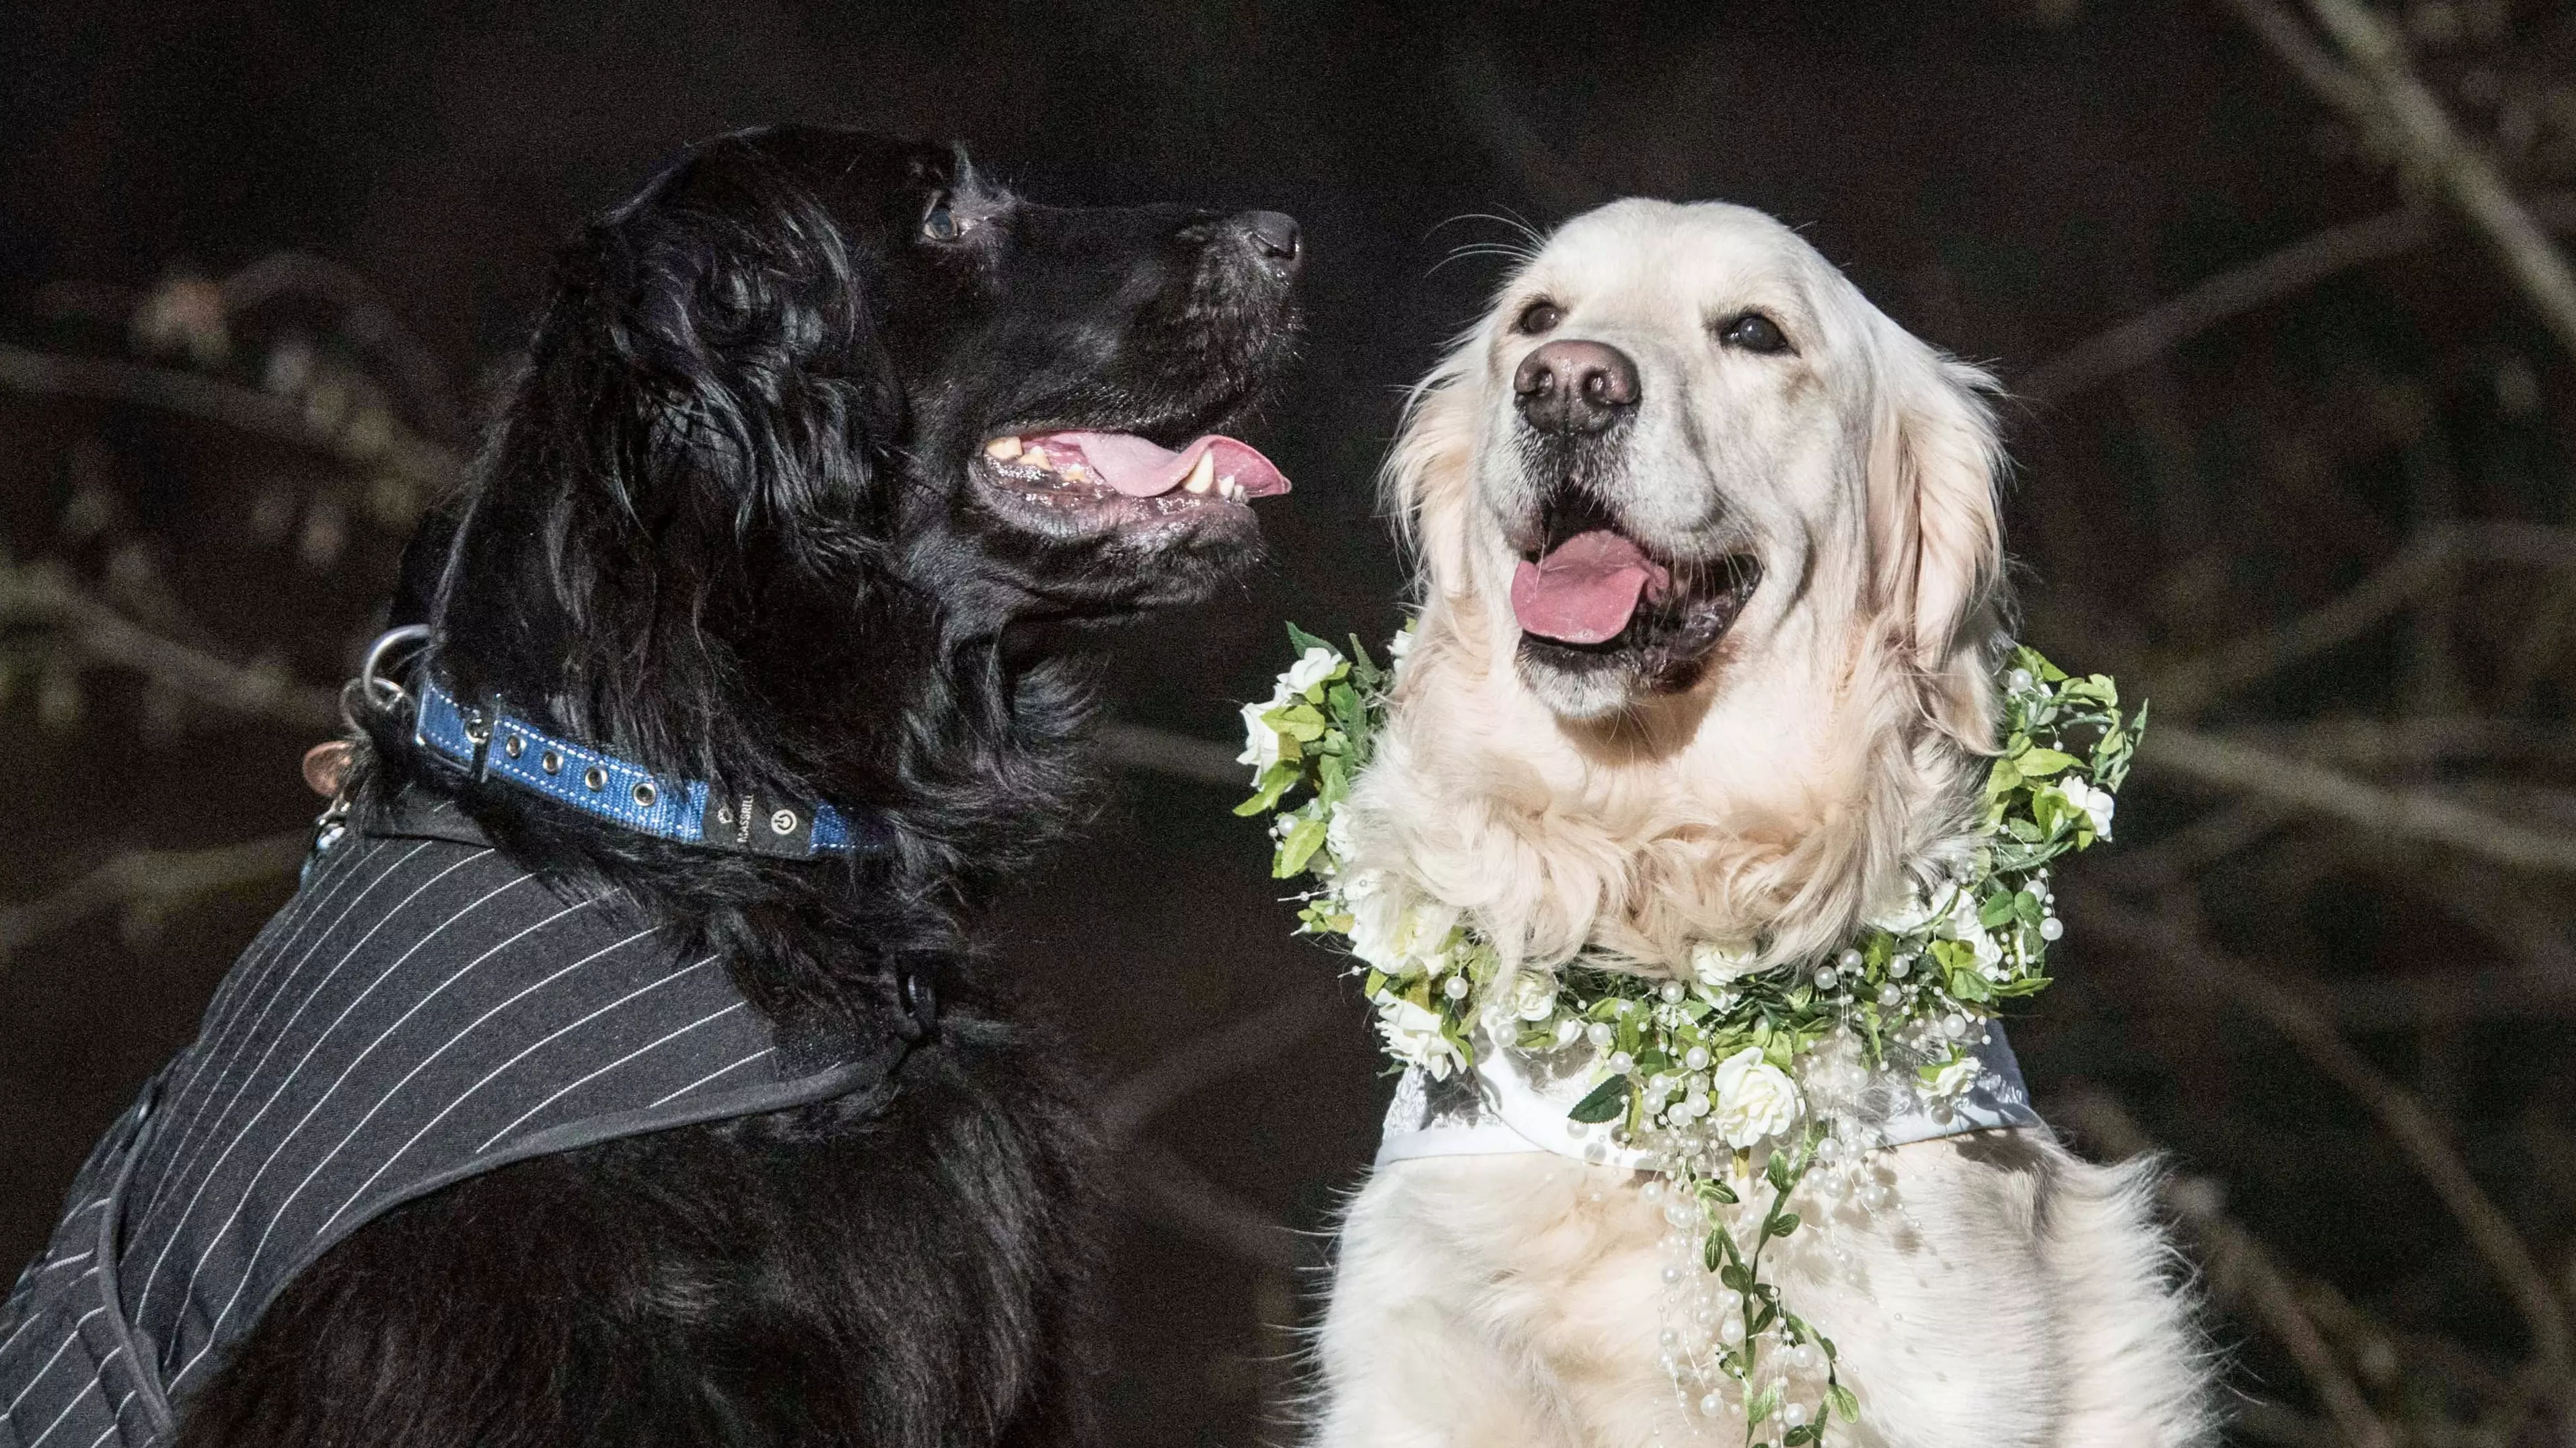 Inseparable Love-Dogs Tie The Knot In Extra AF Canine Wedding Ceremony 